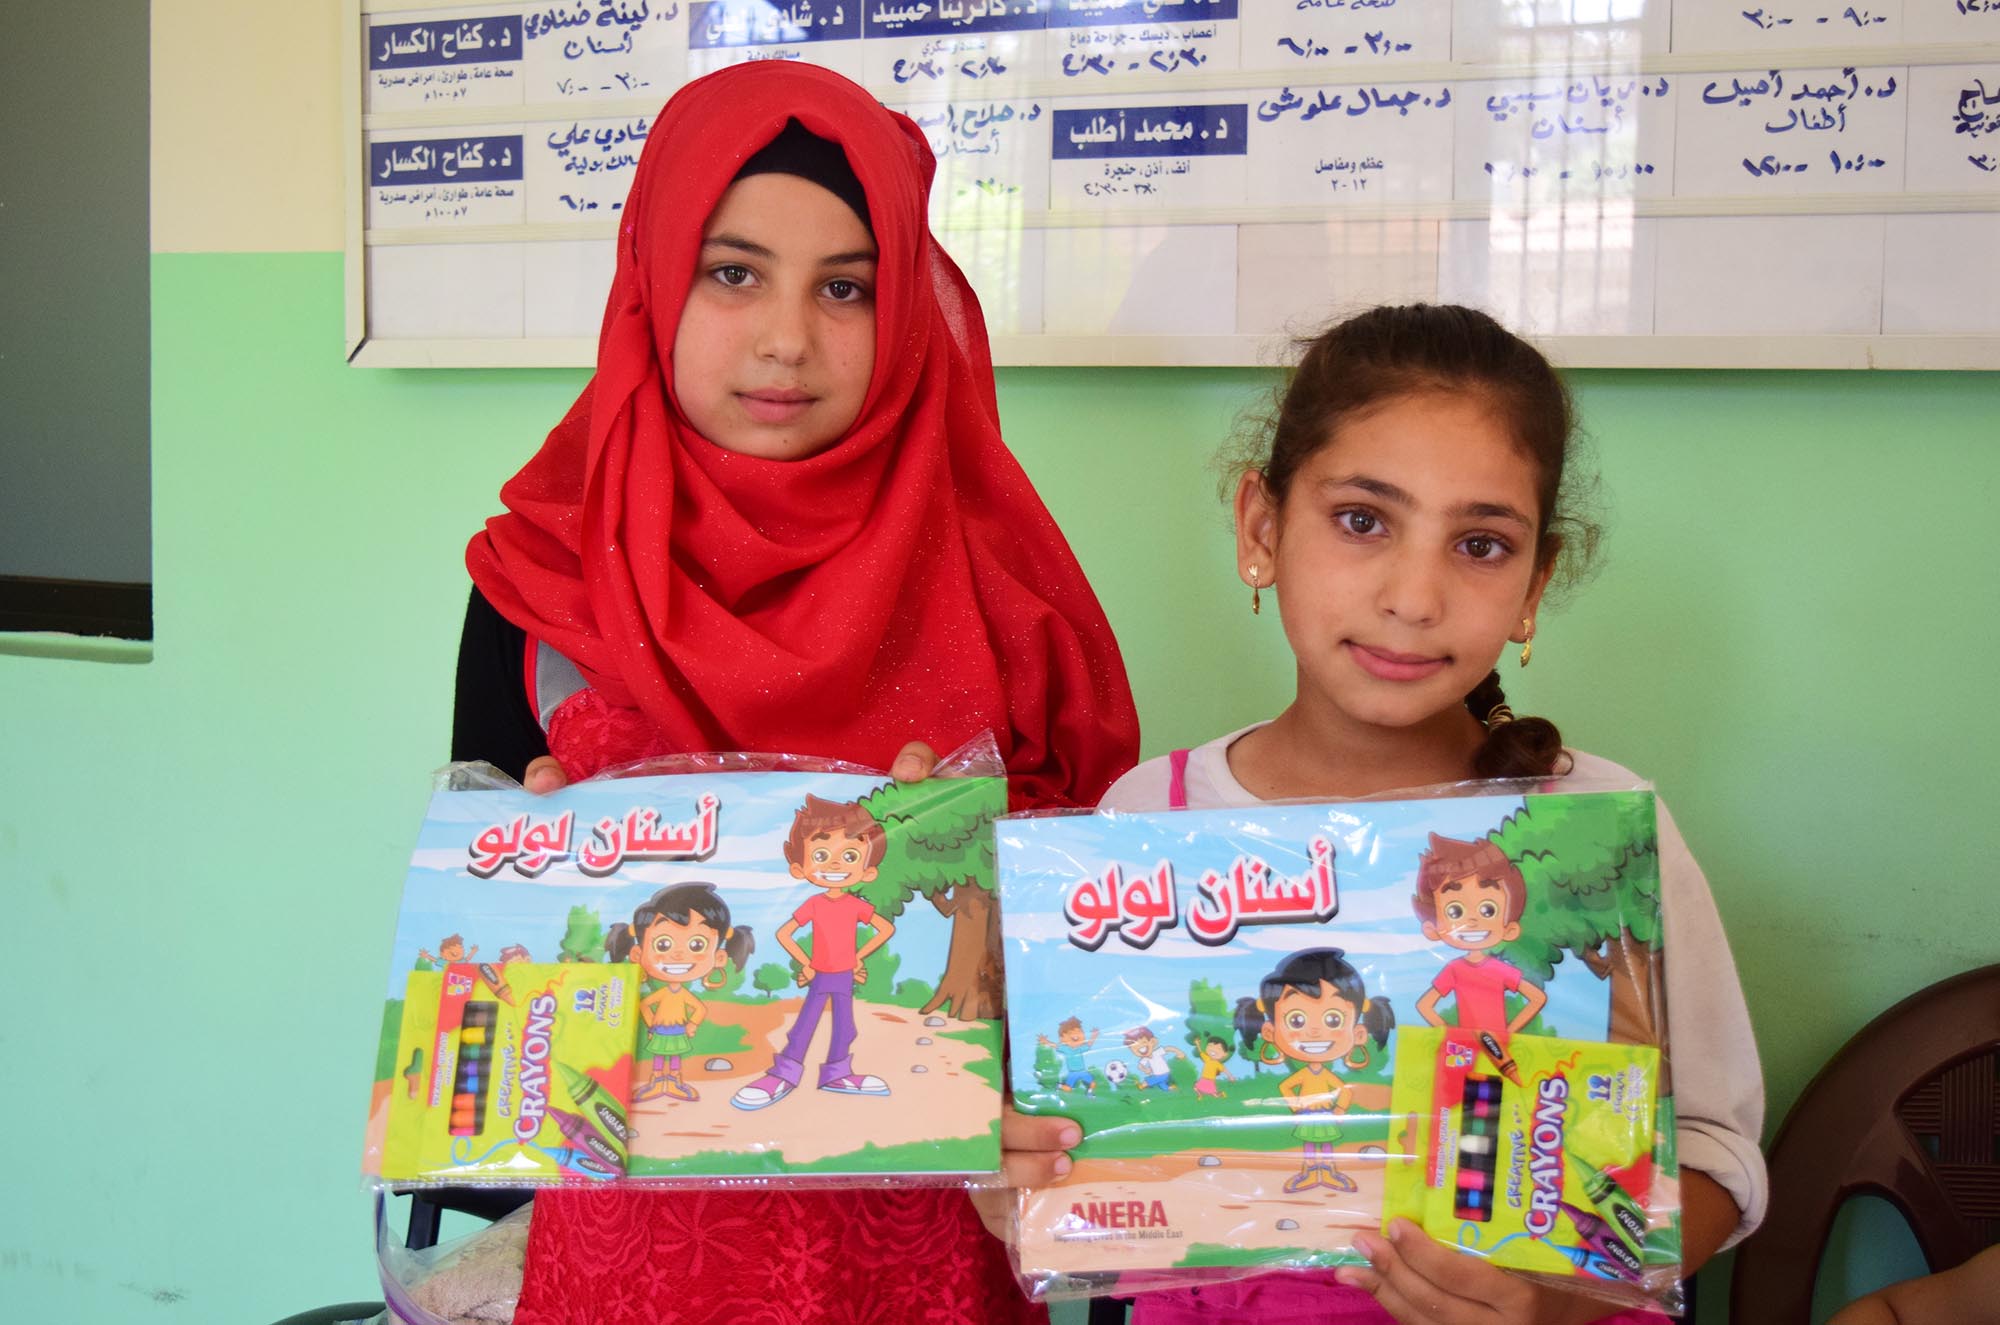 Dalaa and Shahed hold up activity booklets that teach refugee children how to care for their teeth.